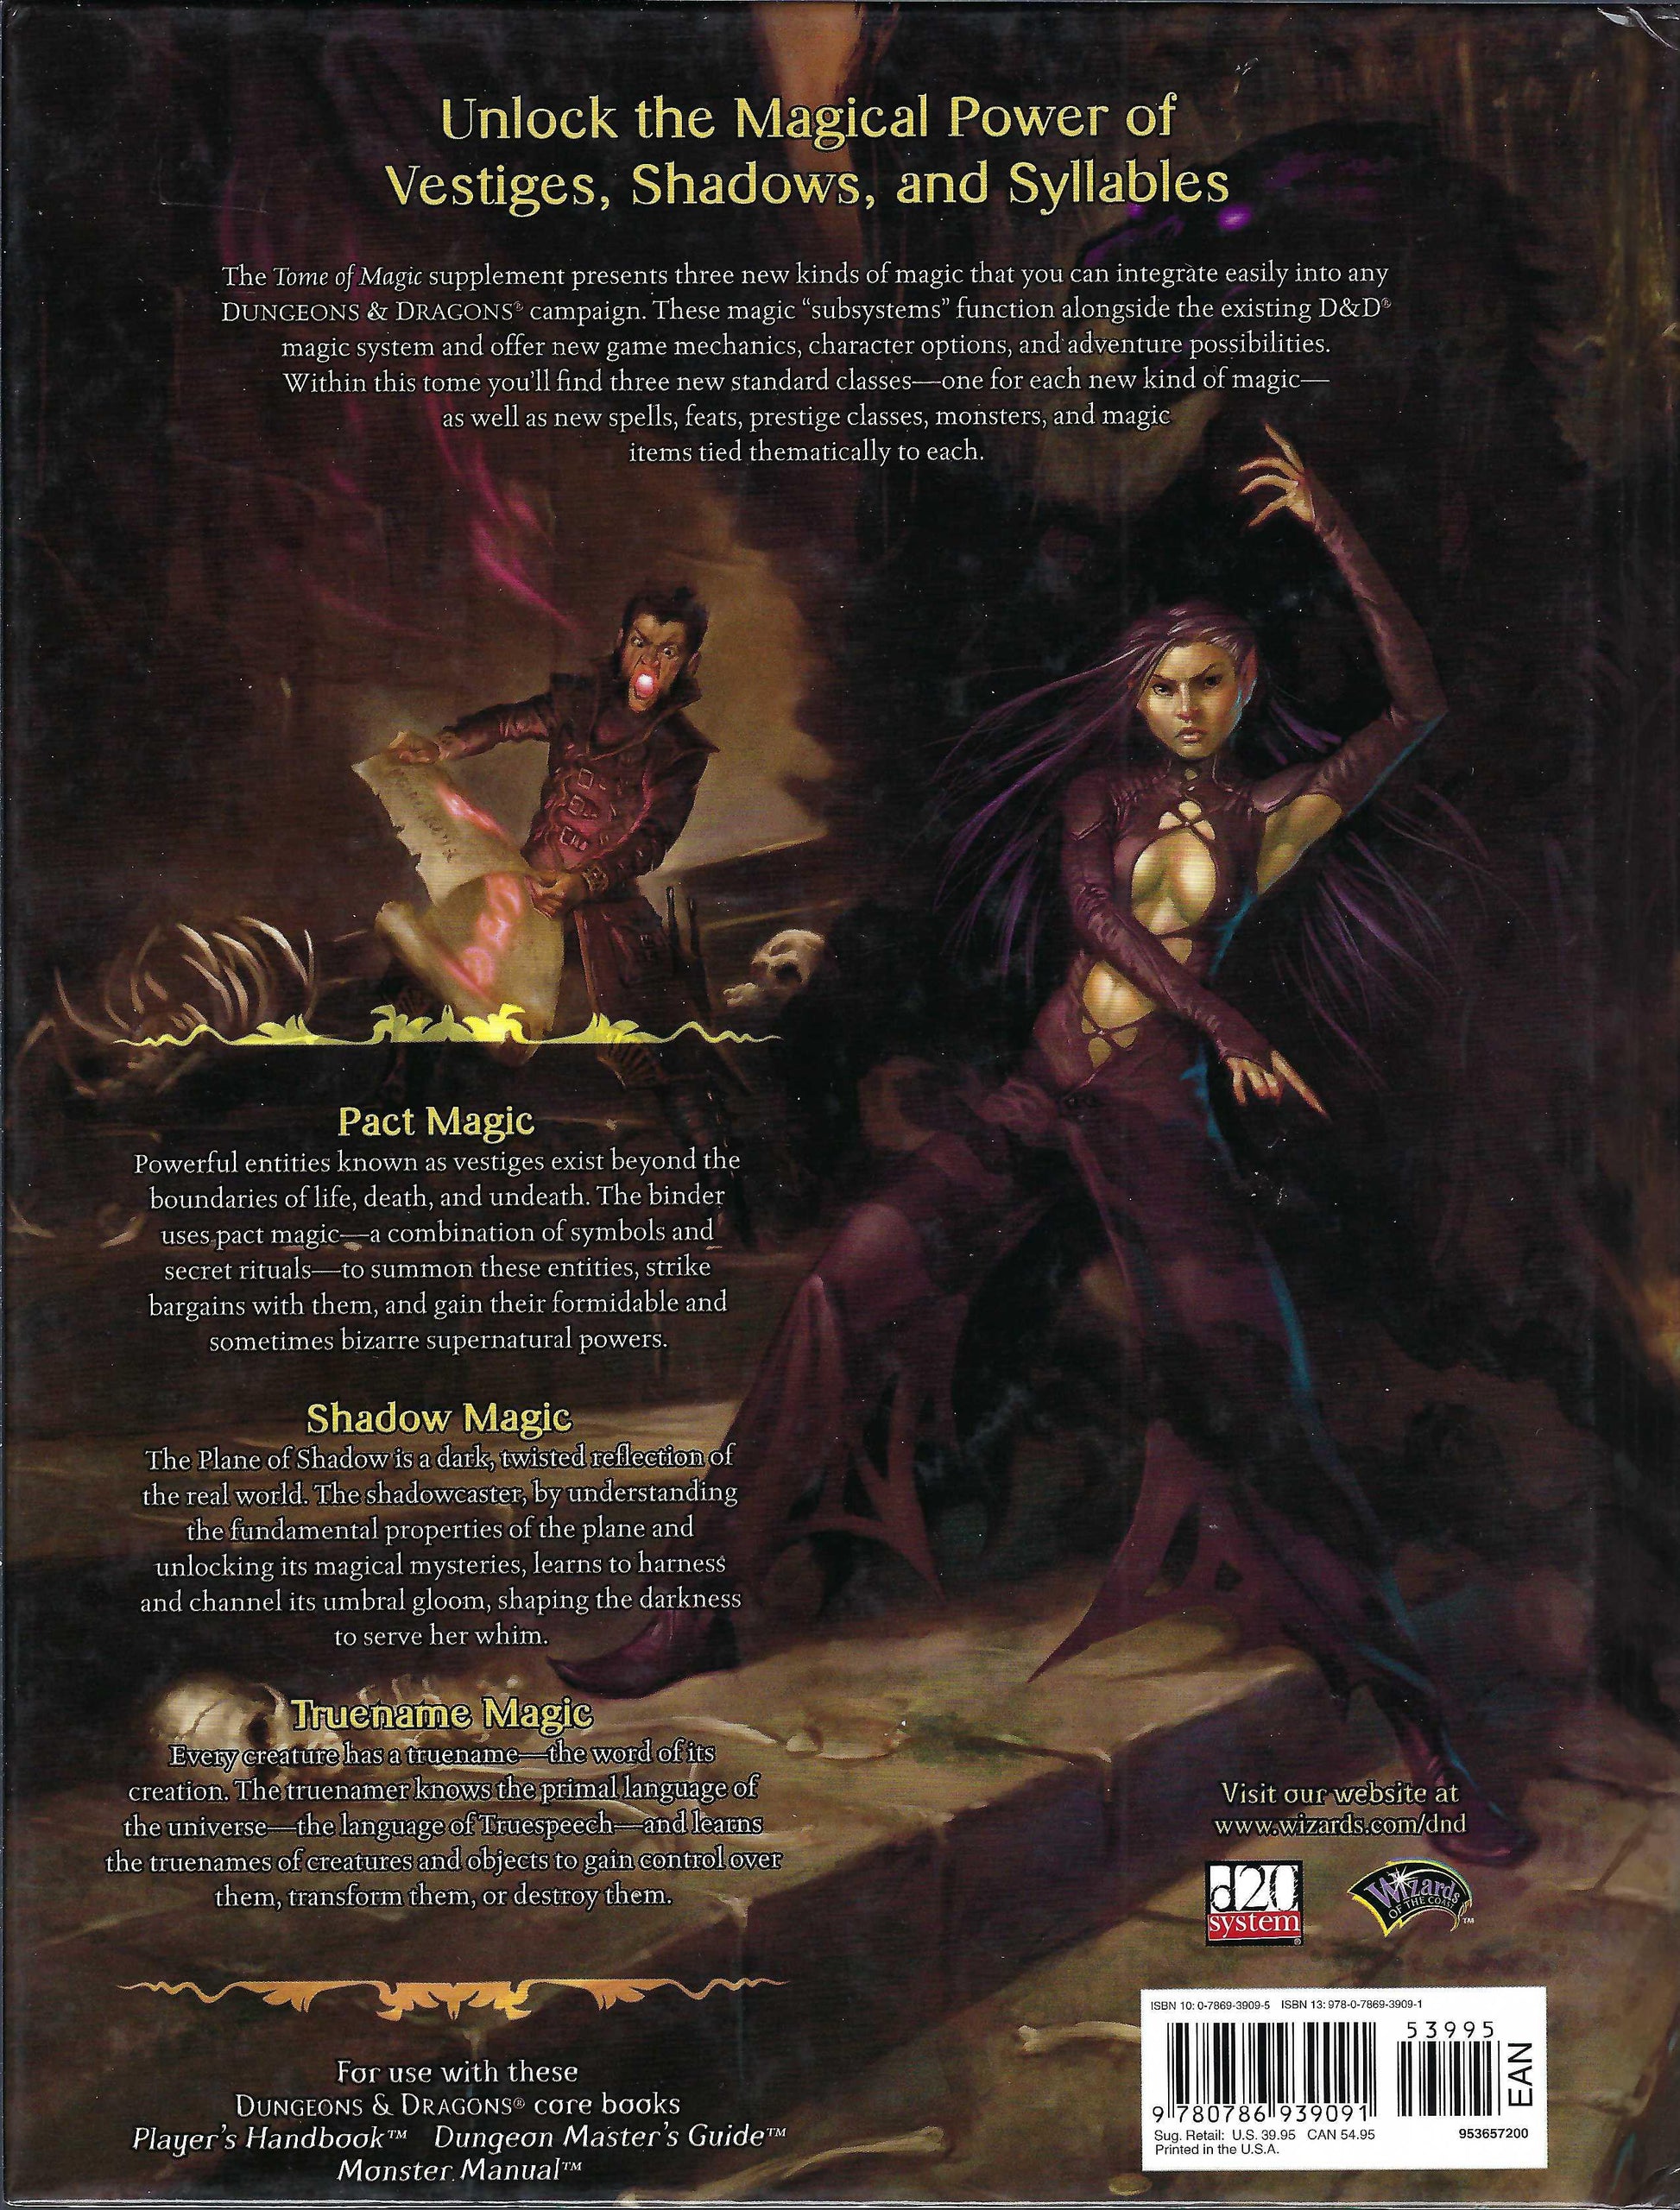 Tome of Magic back cover